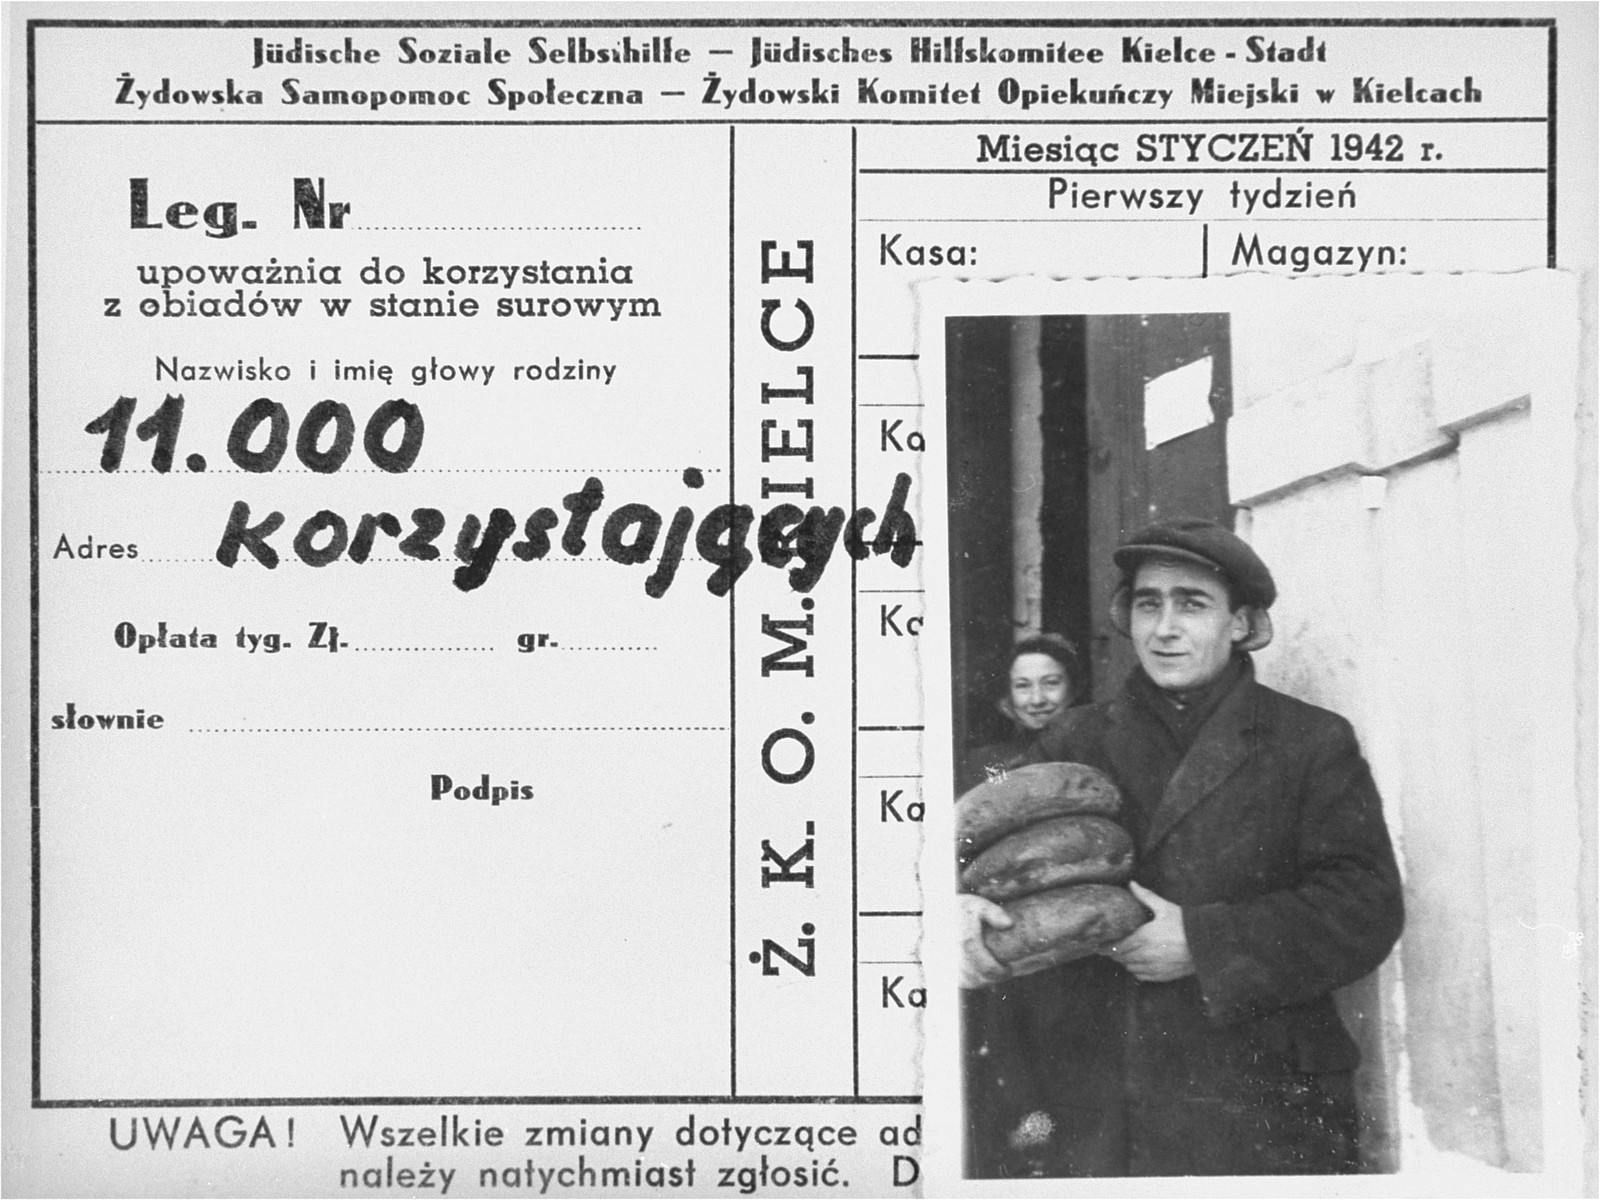 An identification card bearing a photo of a young man carrying loaves of bread in the Kielce ghetto. 

An official ID card was required to receive food rations at the soup kitchen organized by the Jewish Social Self-help Committee of the Jewish Council. 

This photo was one the images included in an official album prepared by the Judenrat of the Kielce ghetto in 1942.